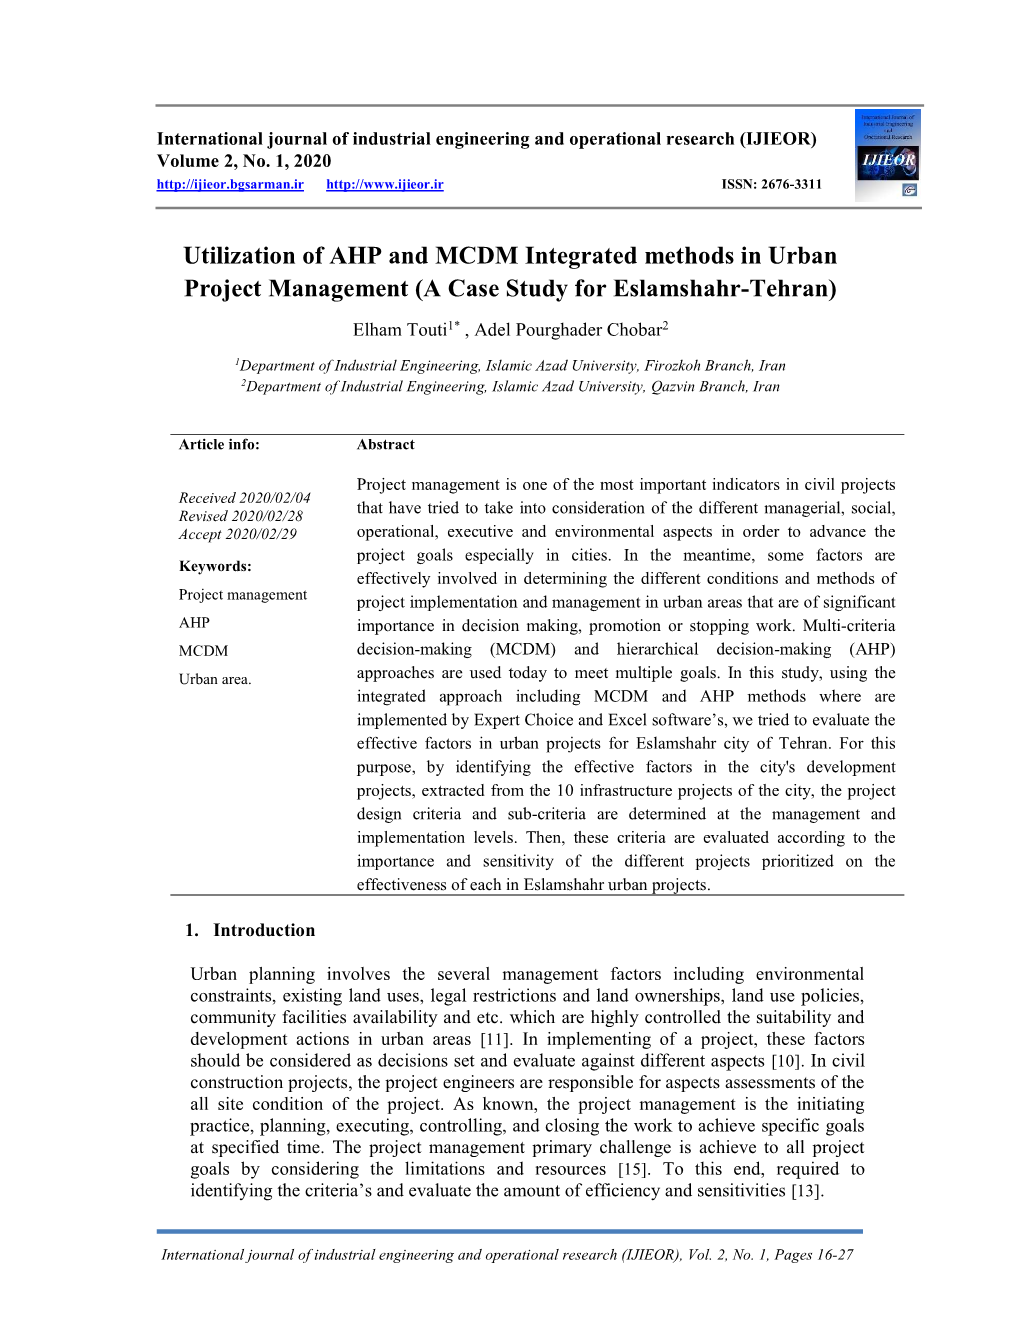 Utilization of AHP and MCDM Integrated Methods in Urban Project Management (A Case Study for Eslamshahr-Tehran)